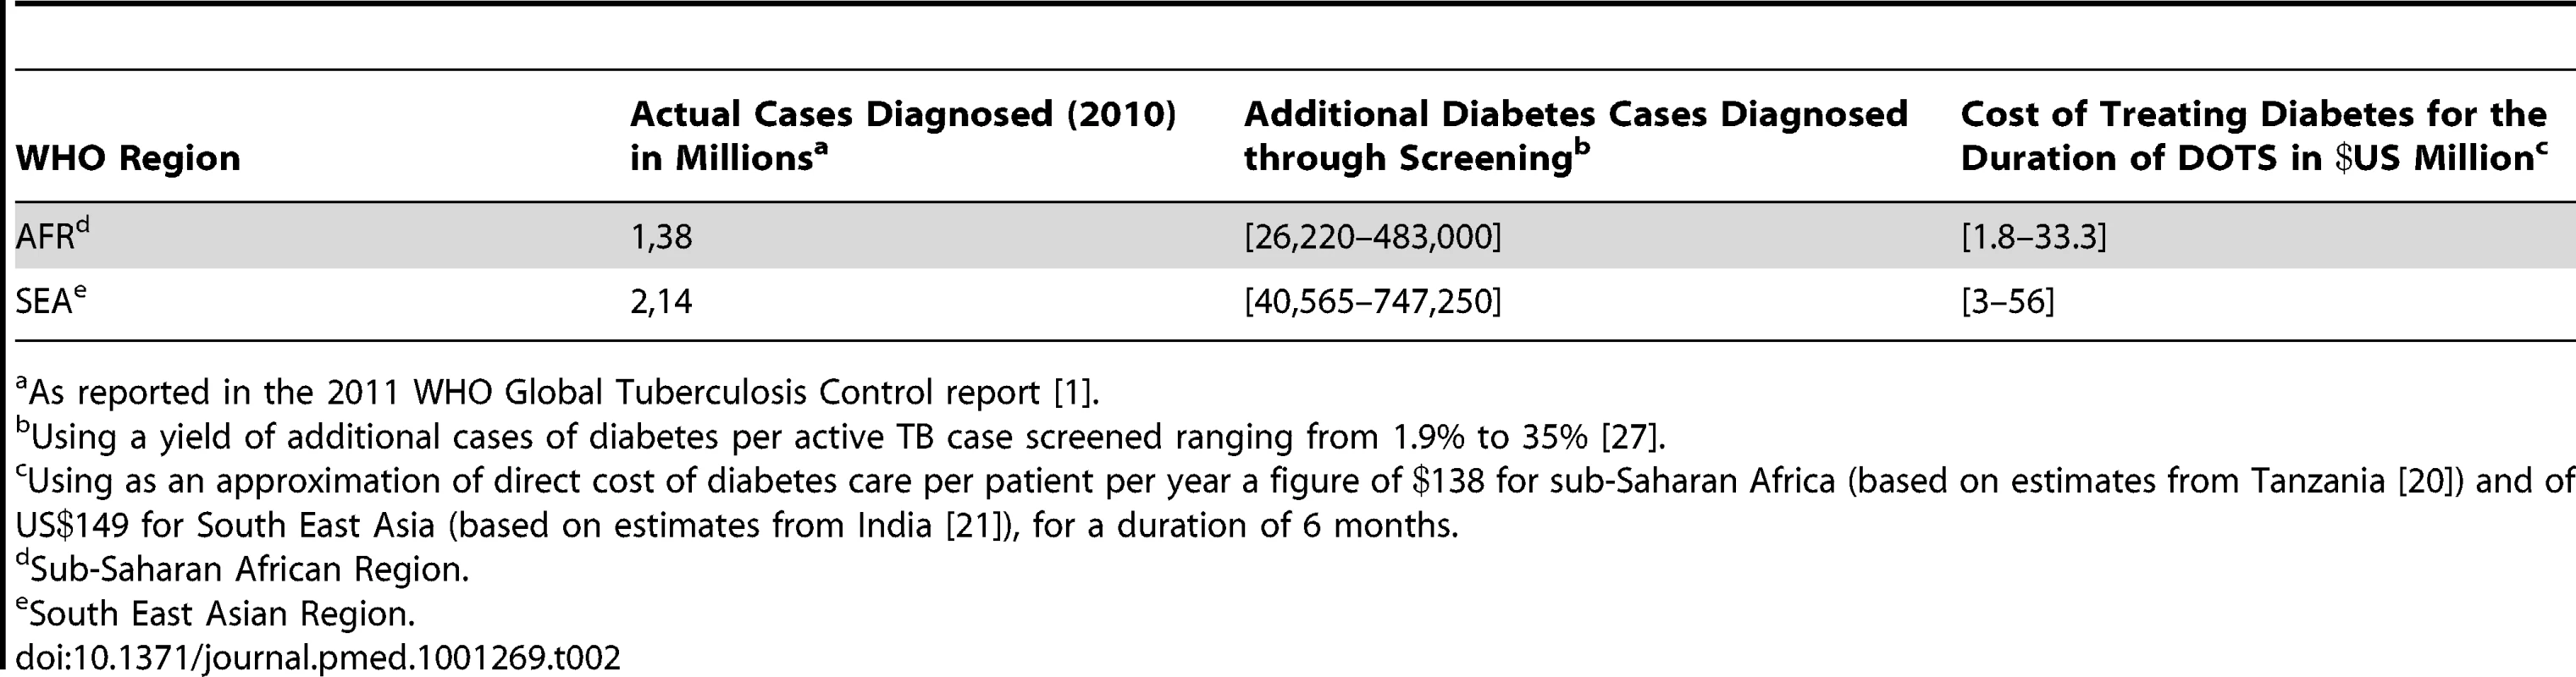 Additional funding required for diabetes care in TB patients using actual number of TB cases diagnosed in Africa and South East Asia.